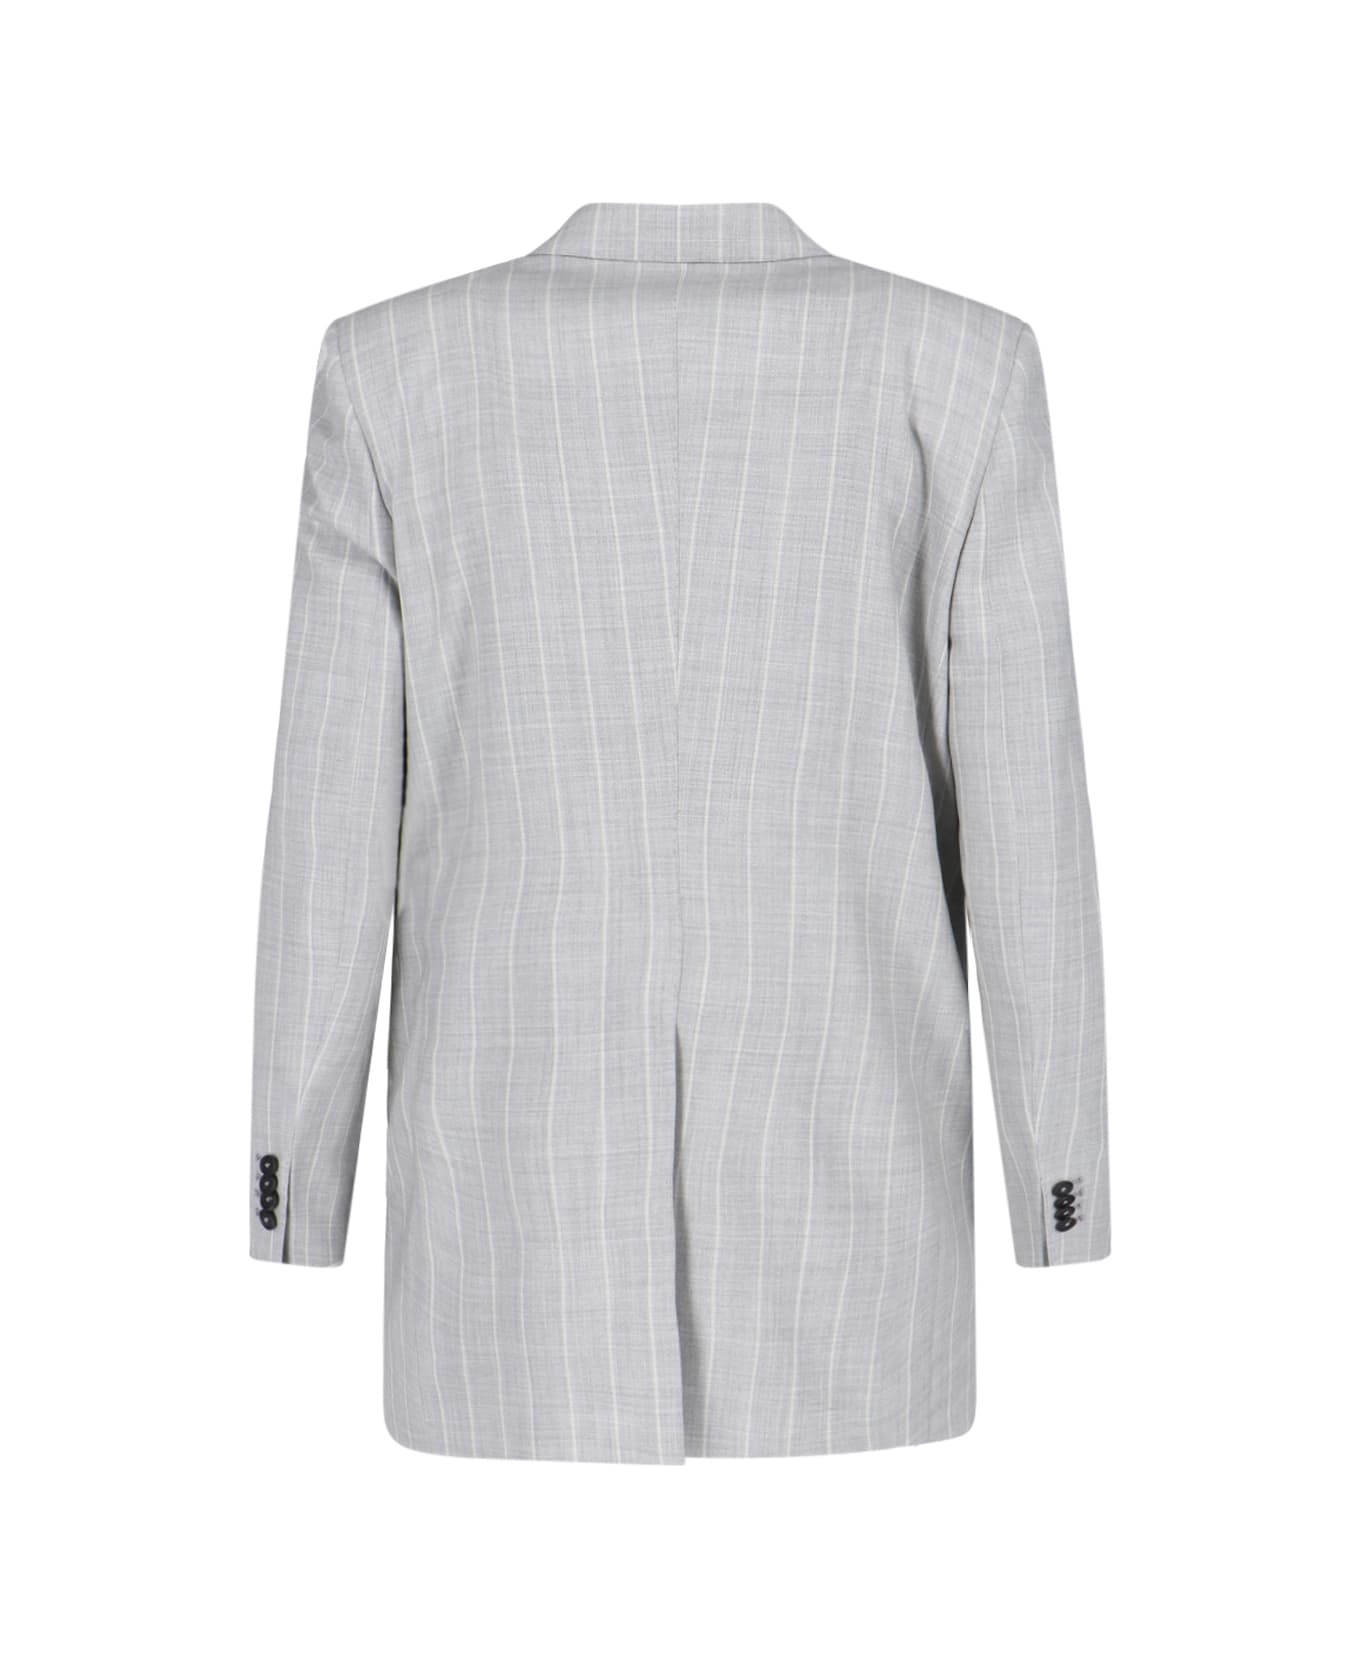 Tagliatore Double-breasted Suit - Gray